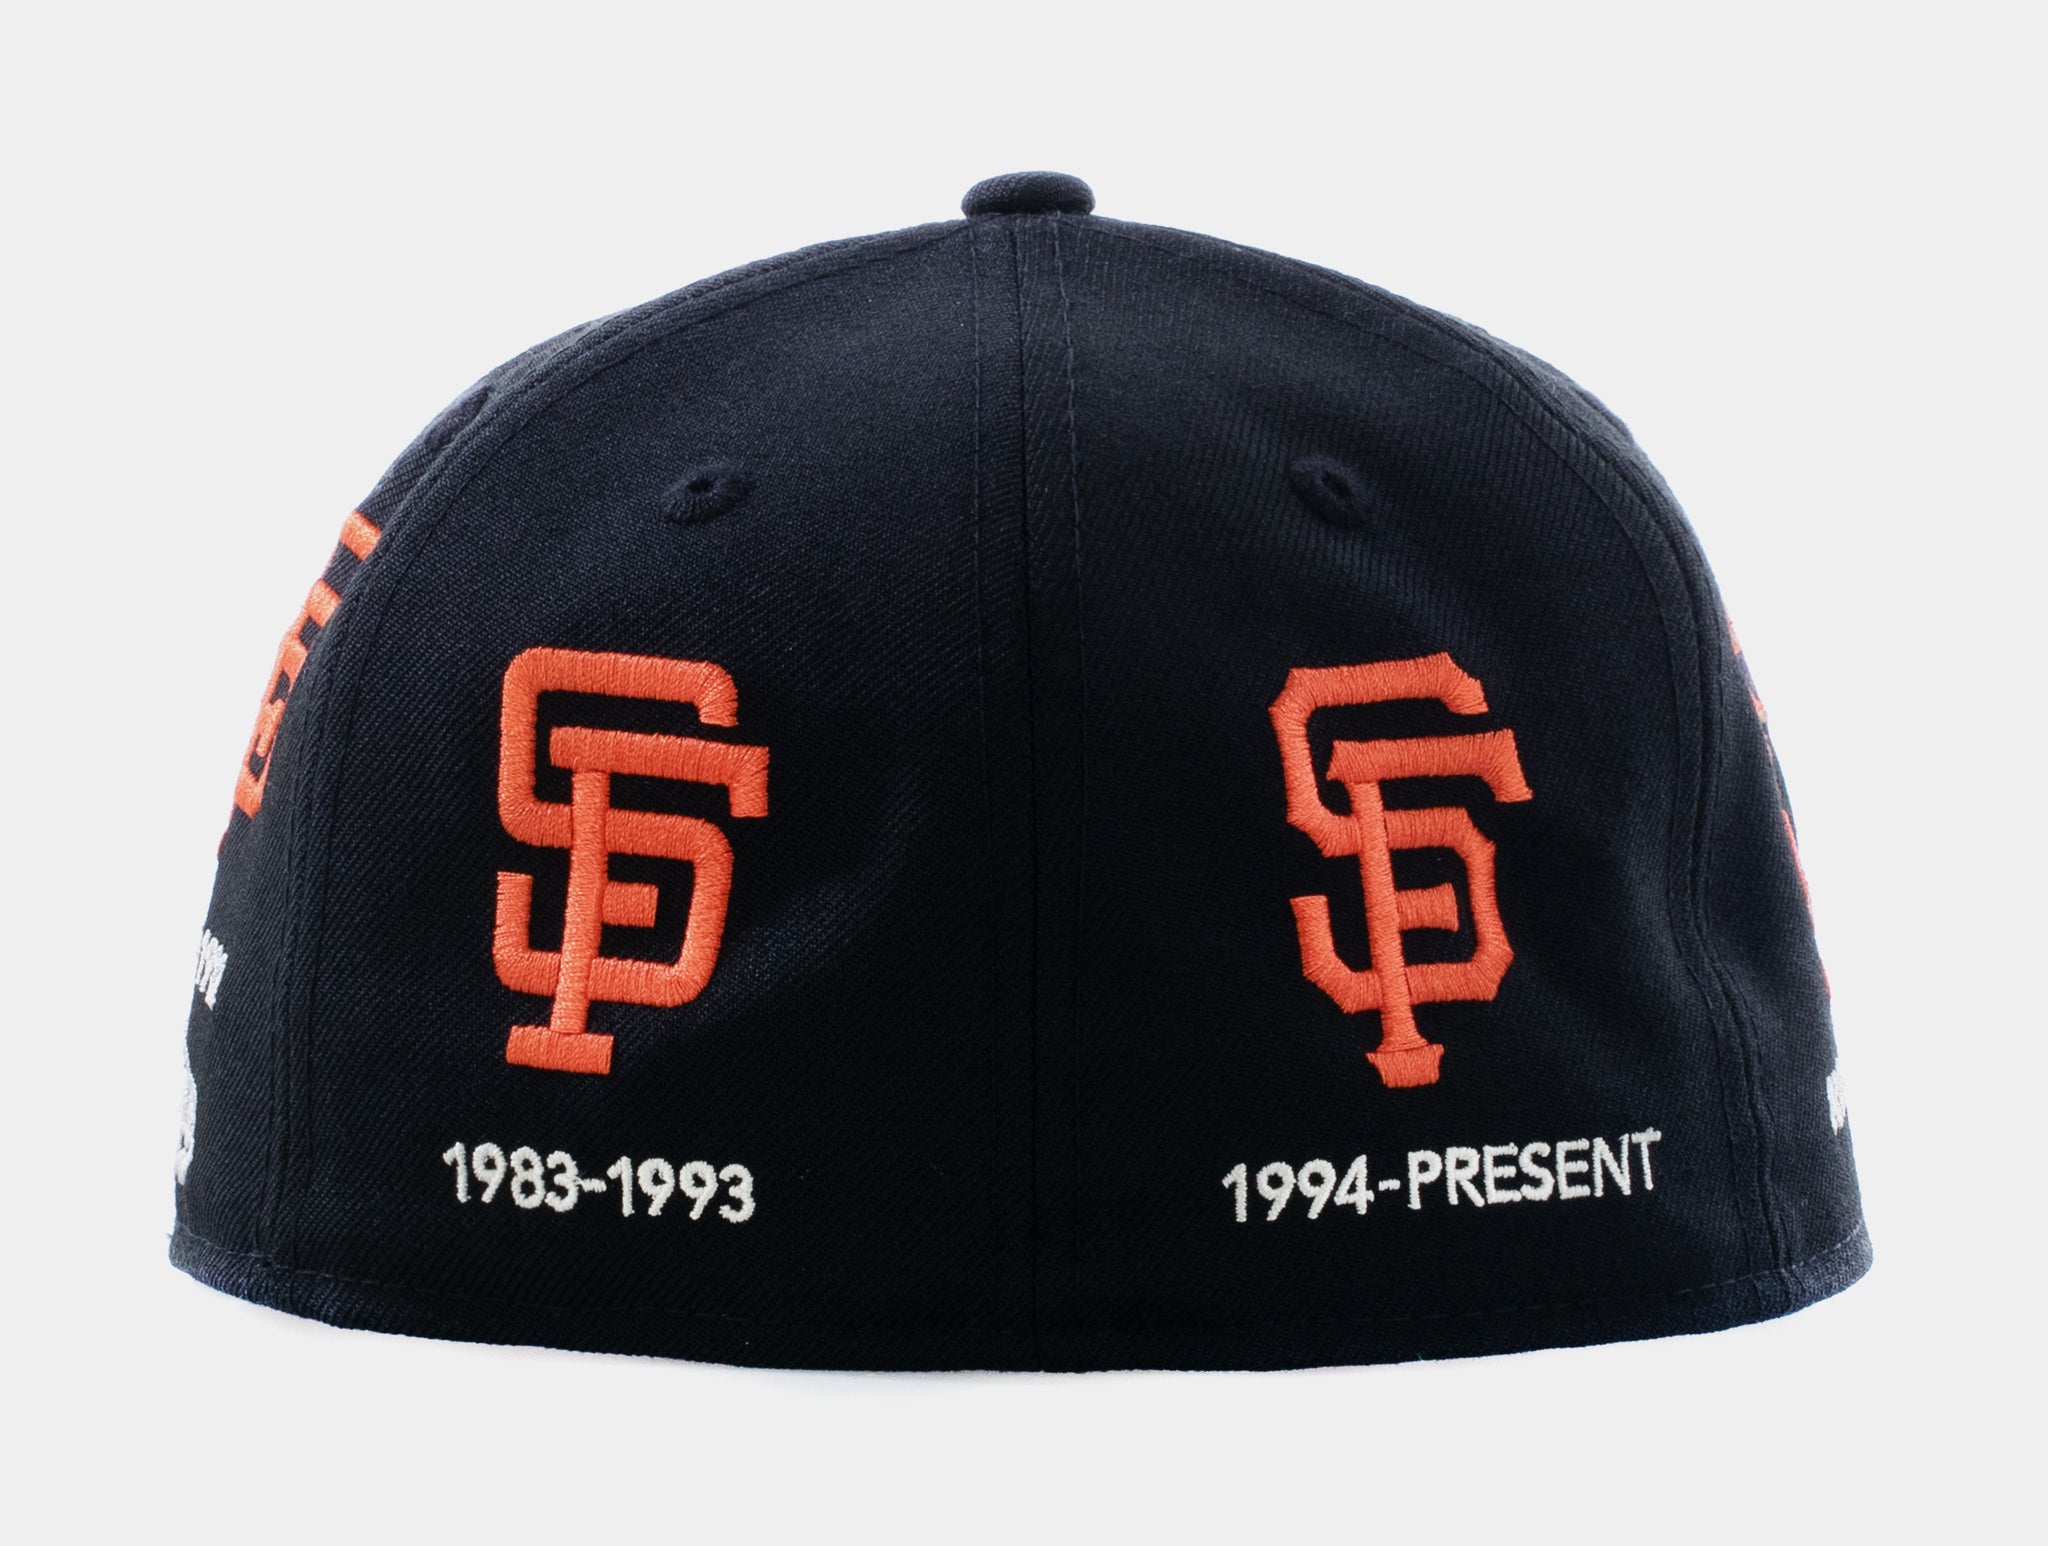 Black San Francisco Giants Team Patch Pride New Era 59fifty Fitted